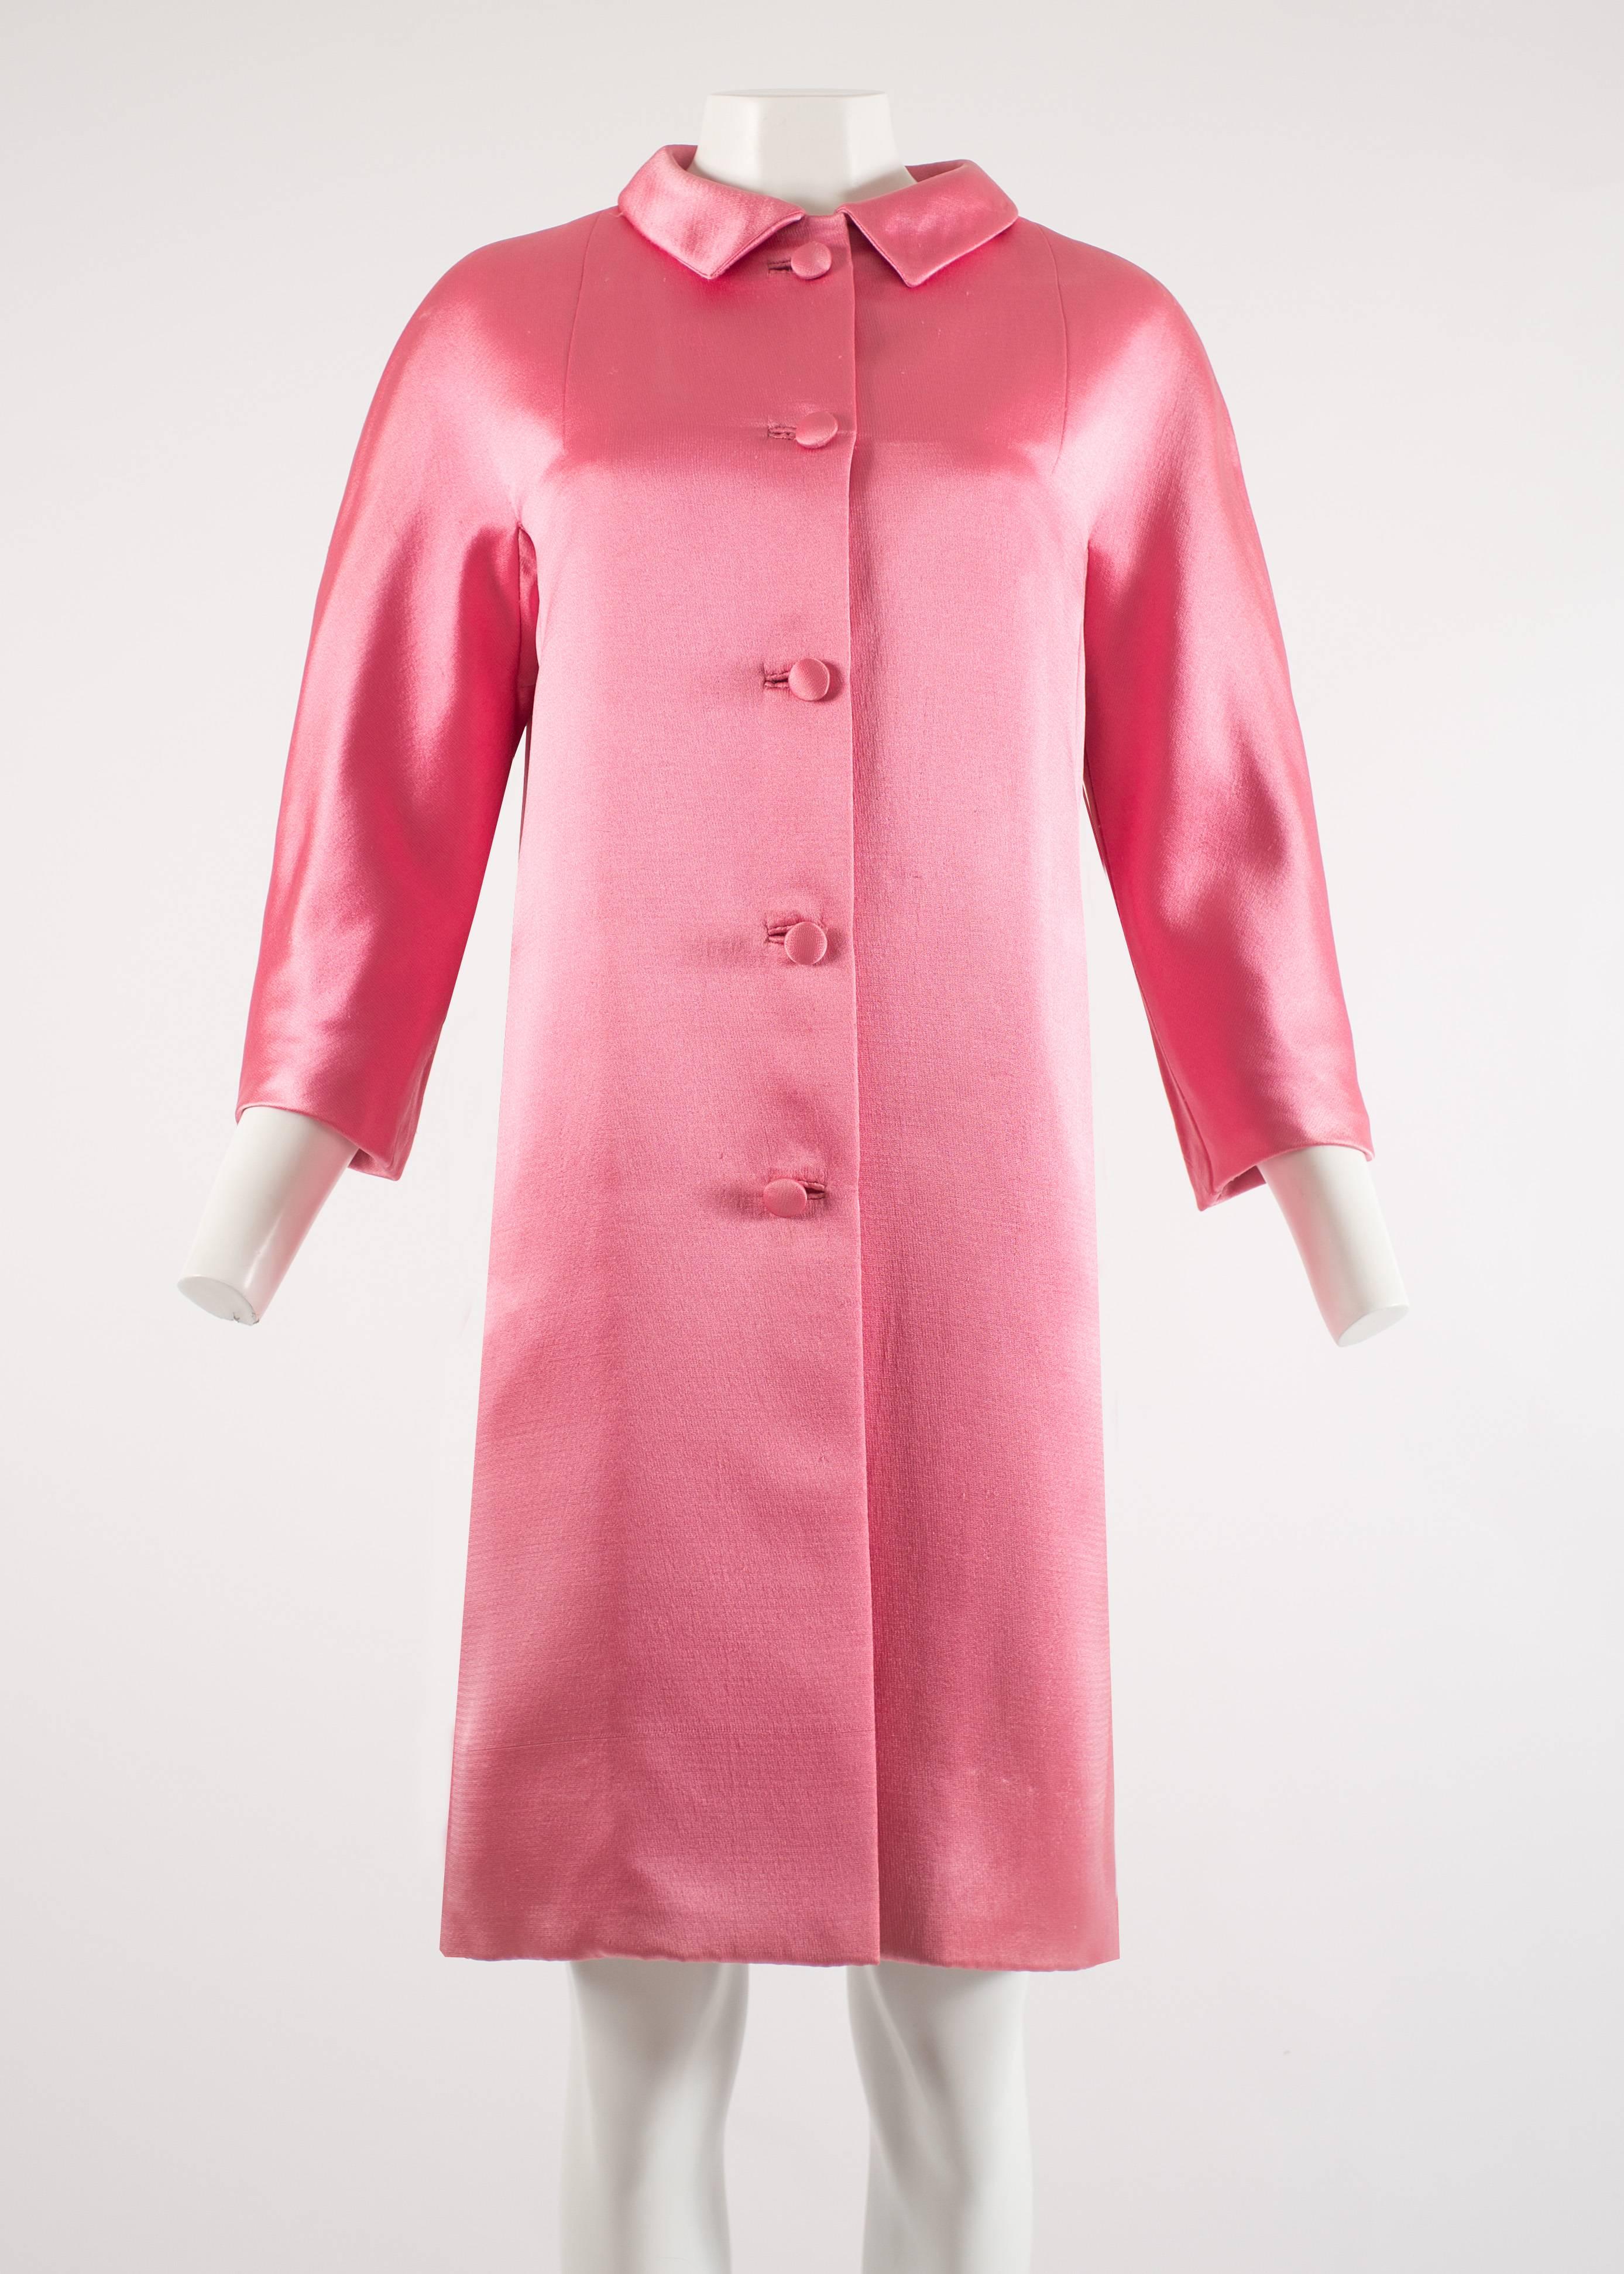 Balenciaga 1963 Haute Couture hot pink silk evening coat

- EISA label
- five button closure fastening at the front
- three quarter length raglan sleeves
- finishing just above the knee
- black silk lining
- two side pockets